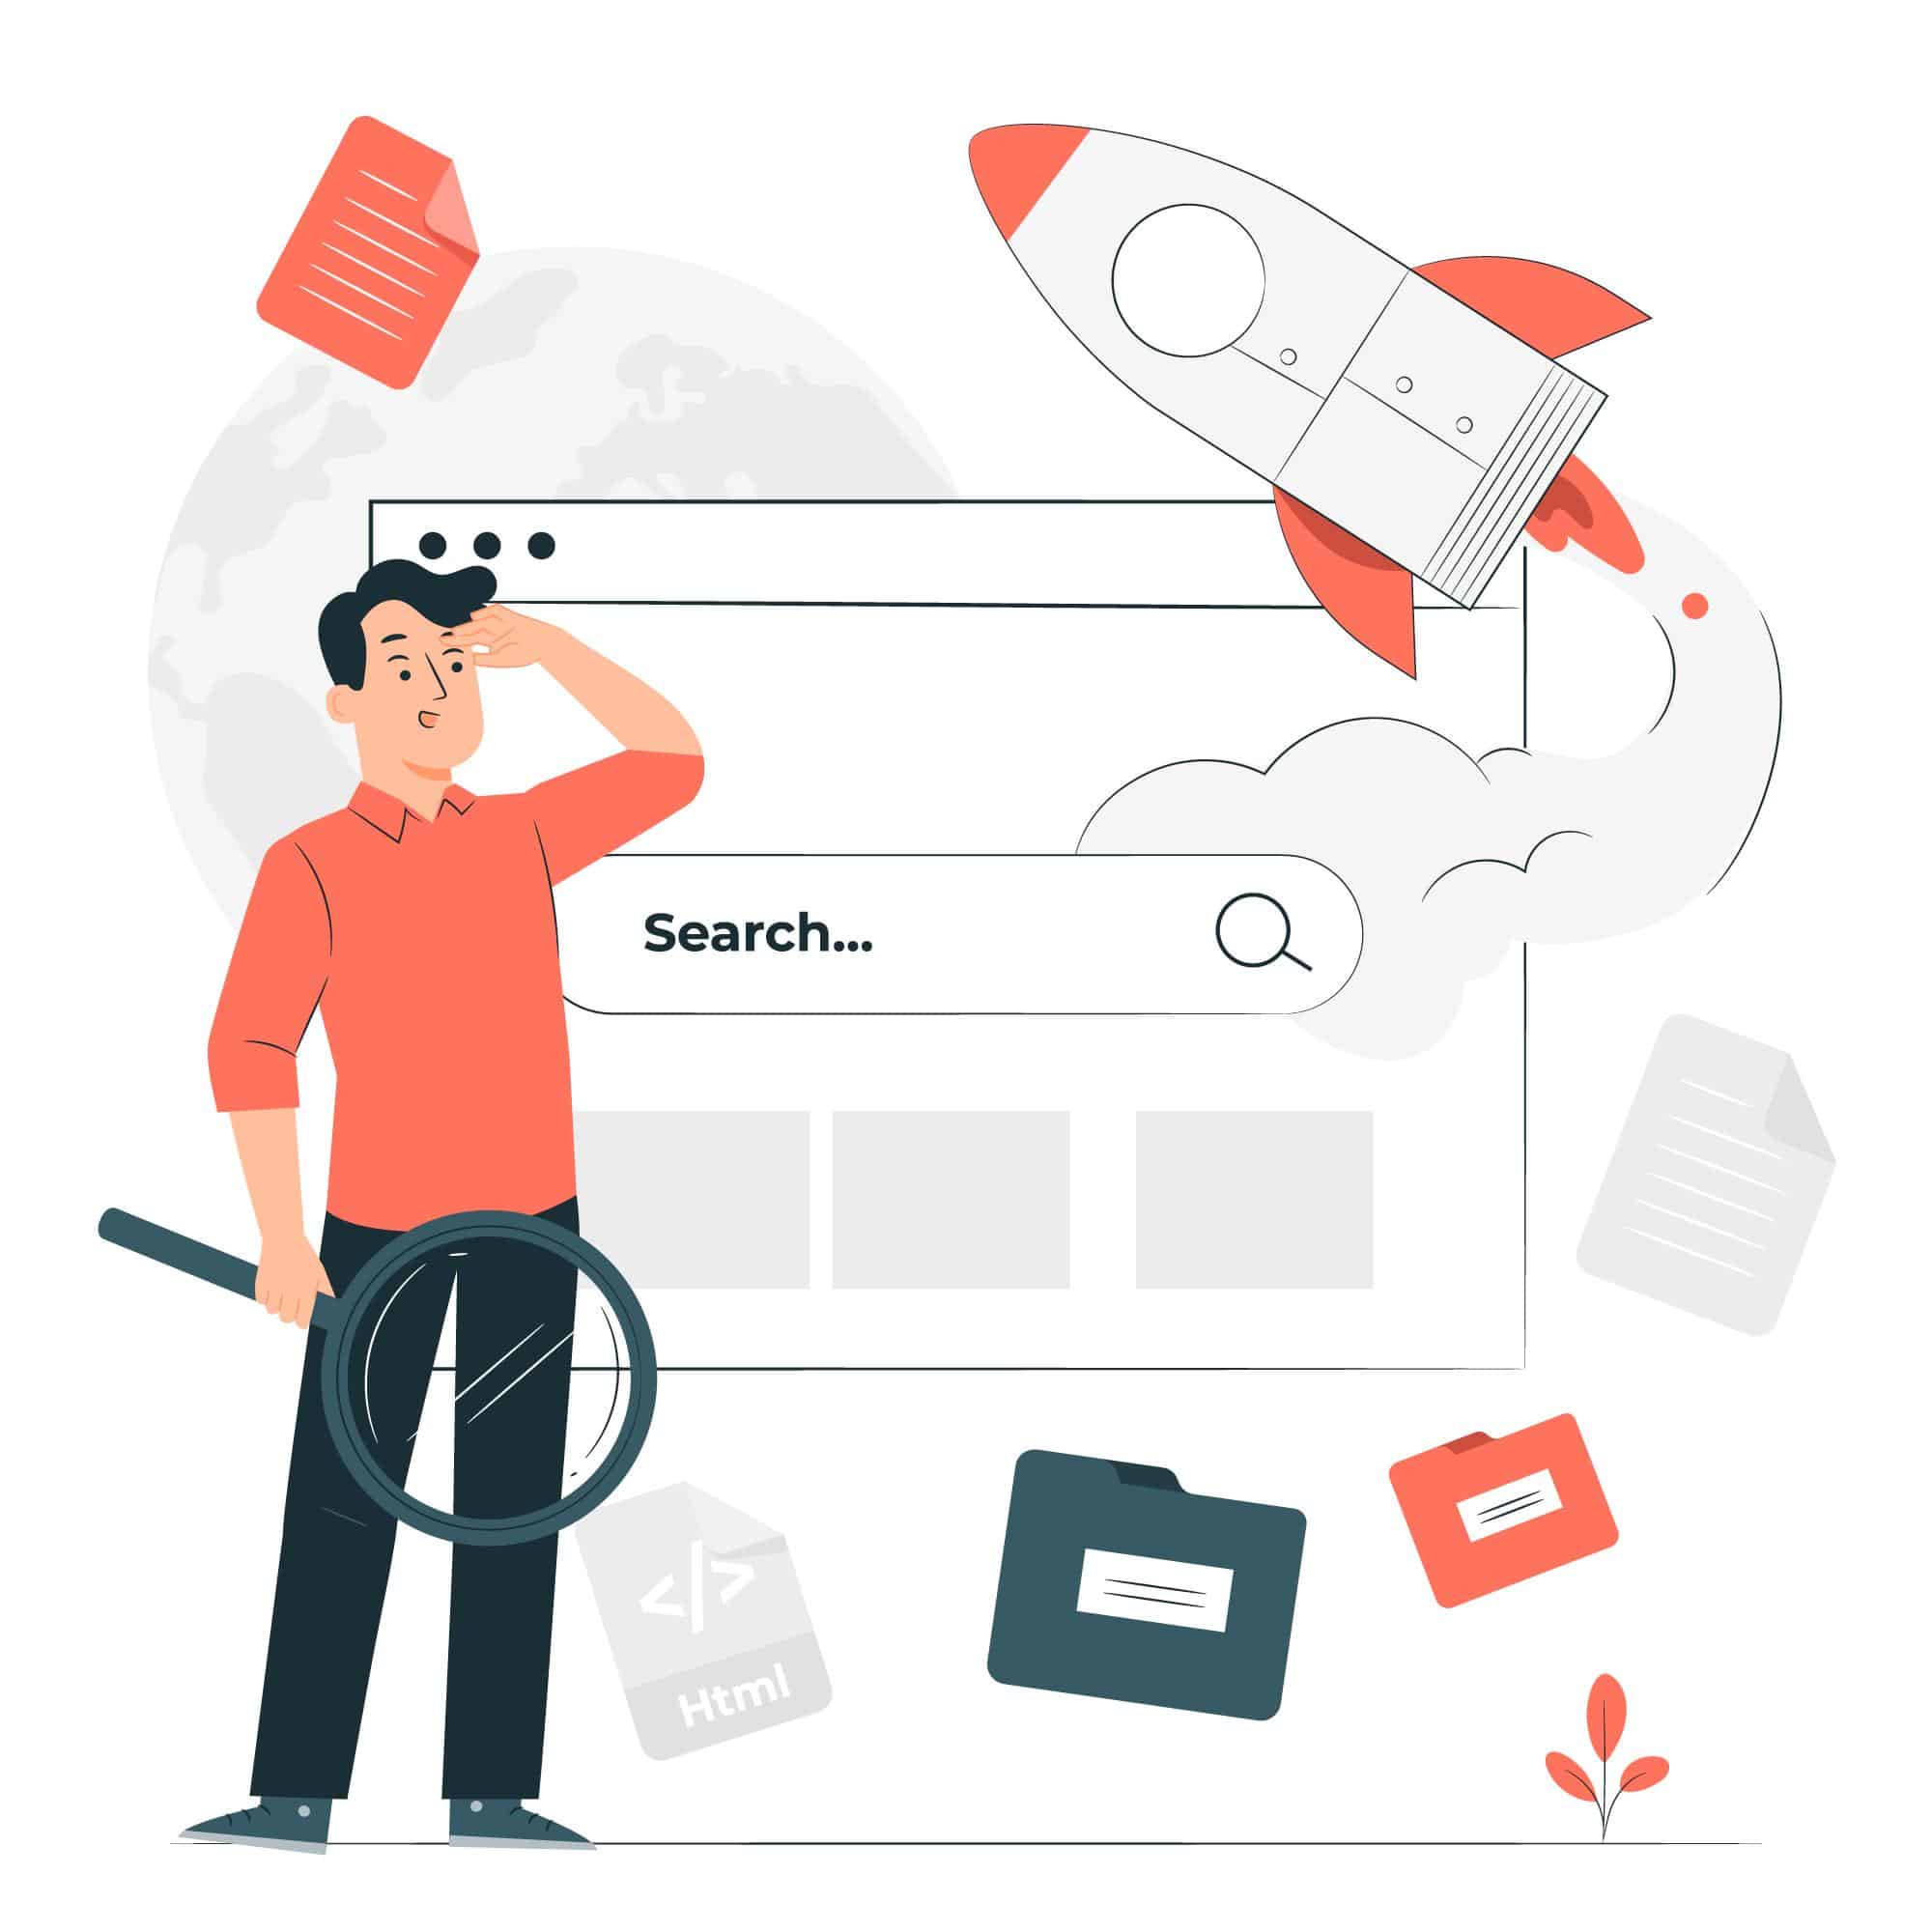 Man holding magnifying glass search icon to search online; SEO tools with rocketship